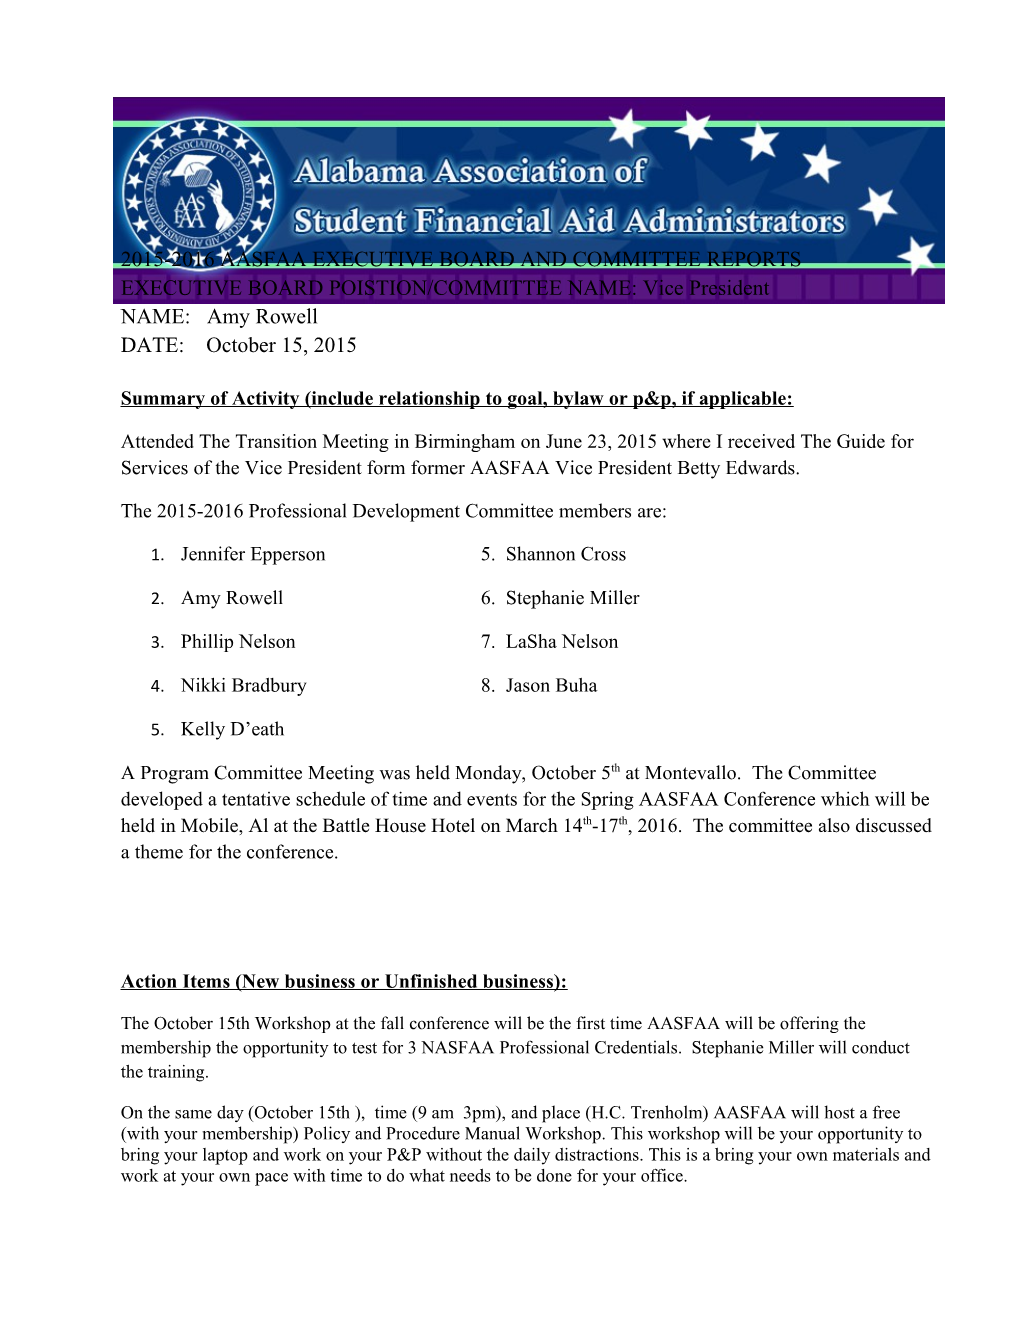 2015-2016 Aasfaa Executive Board and Committee Reports s1